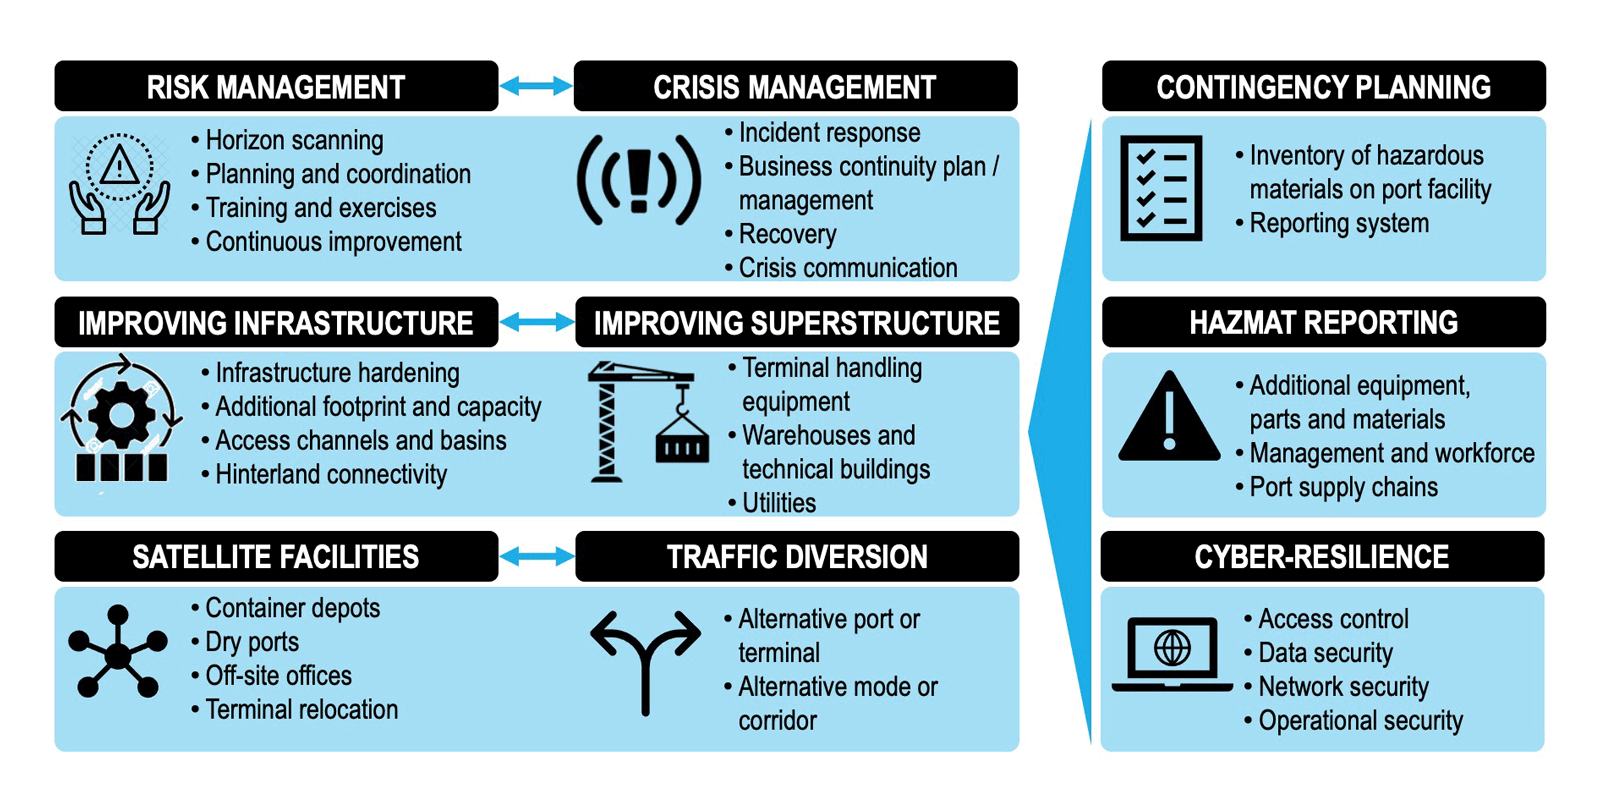 Key mitigation and response measures to port disruptions